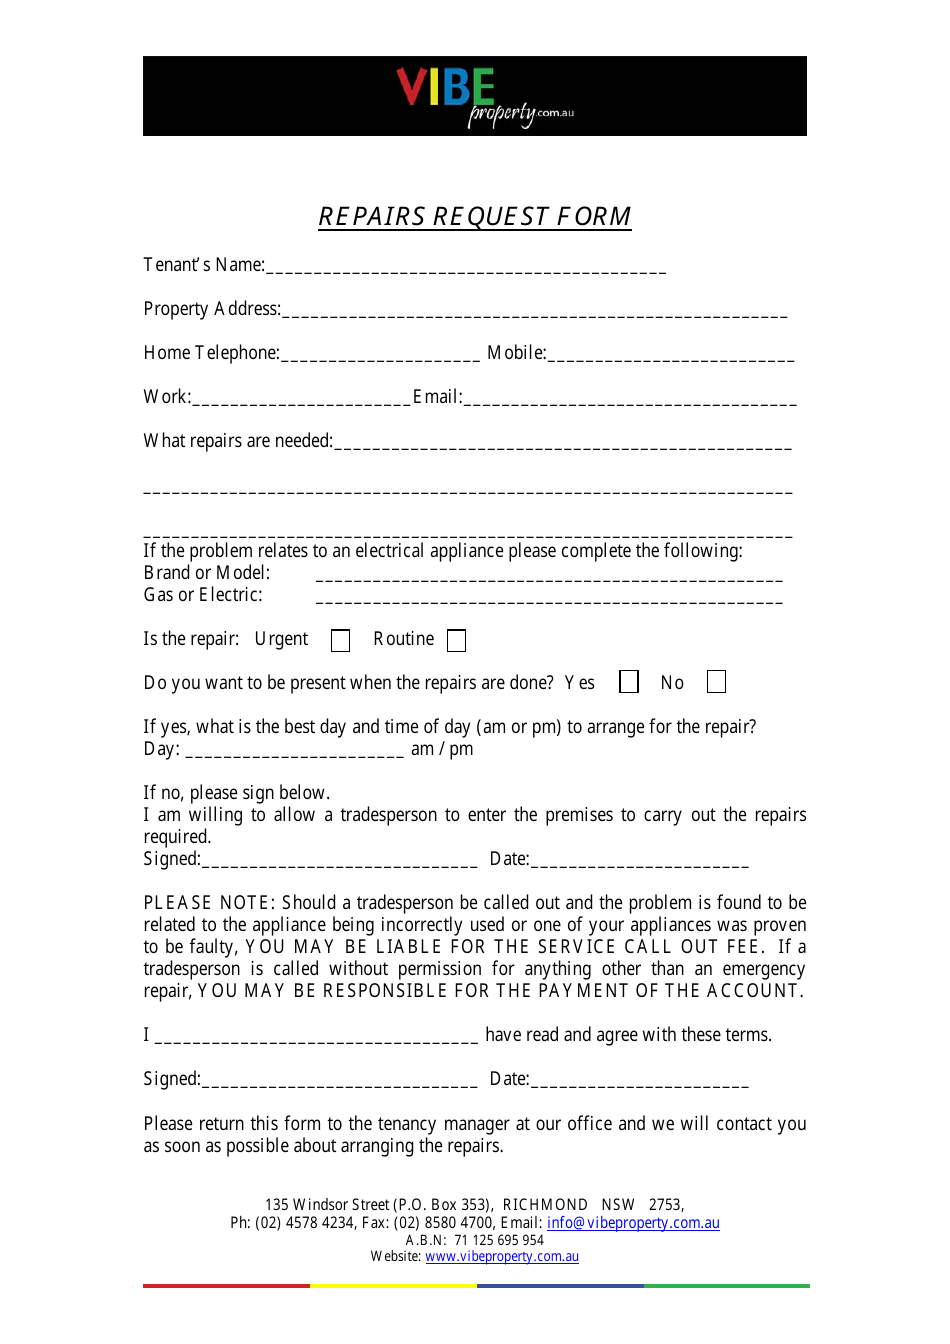 Repairs Request Form - Vibe Property, Page 1